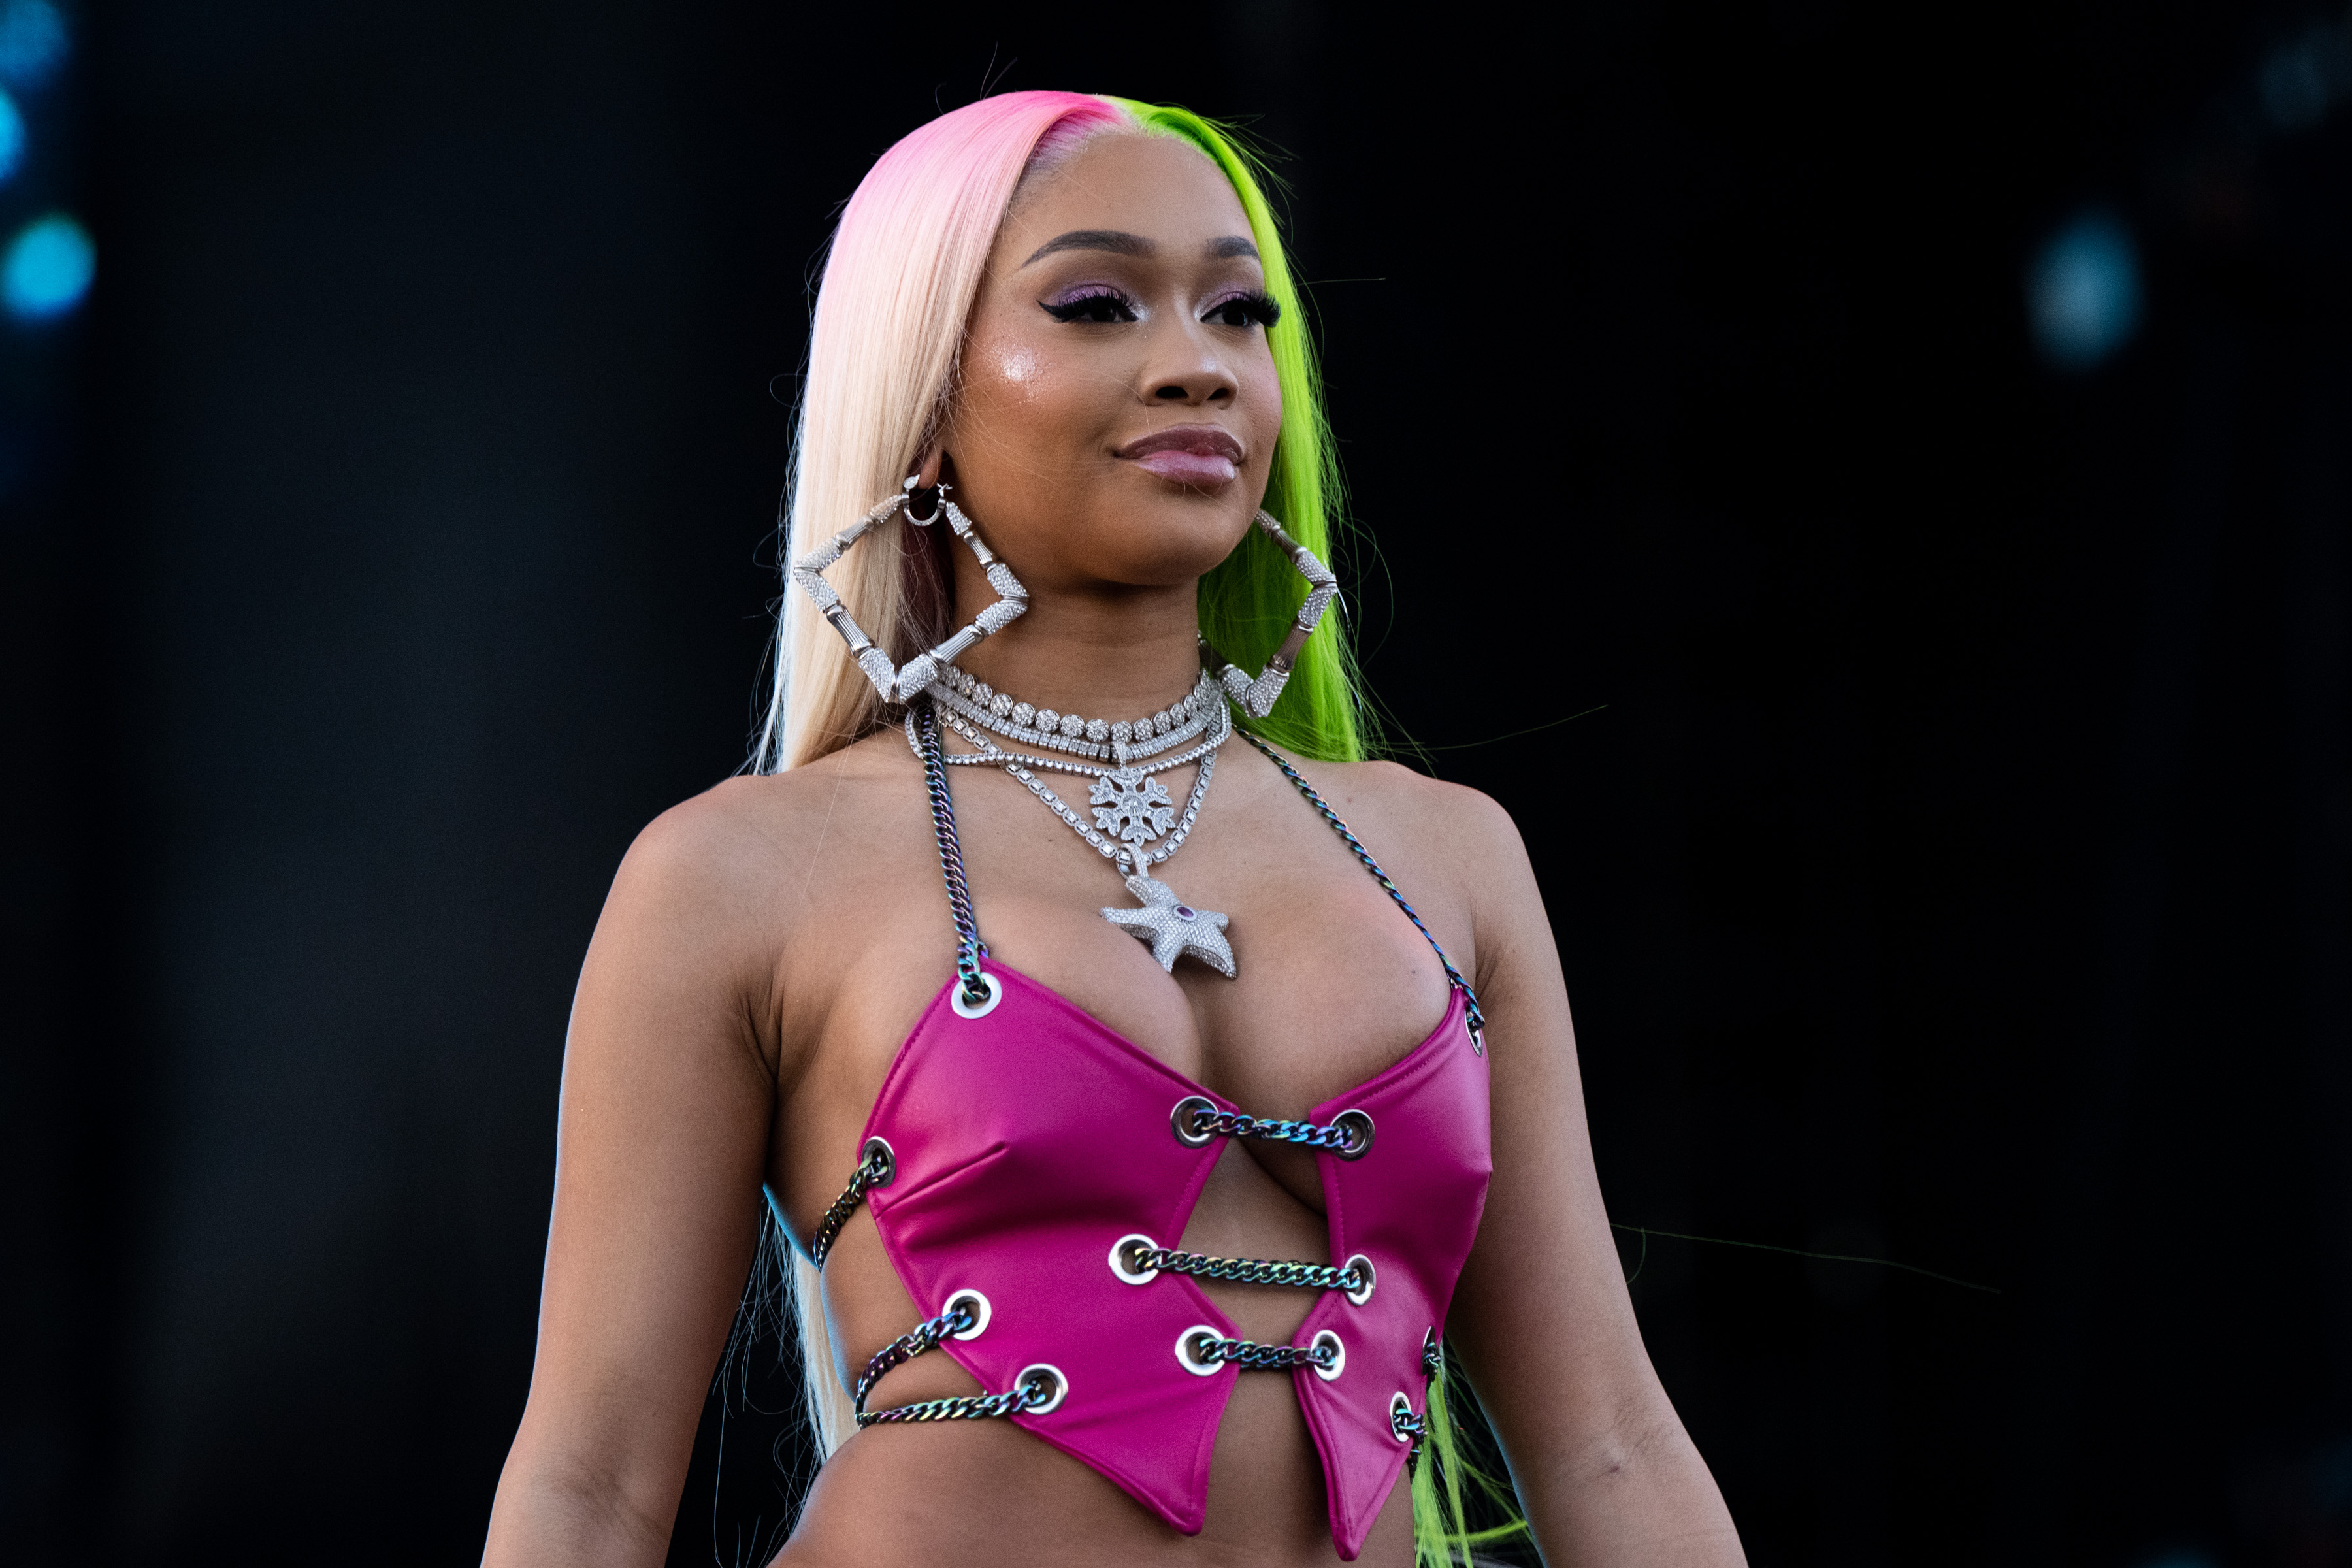 Saweetie Is “Ready To Play” In Sultry New Leather-Clad IG Photo Dump